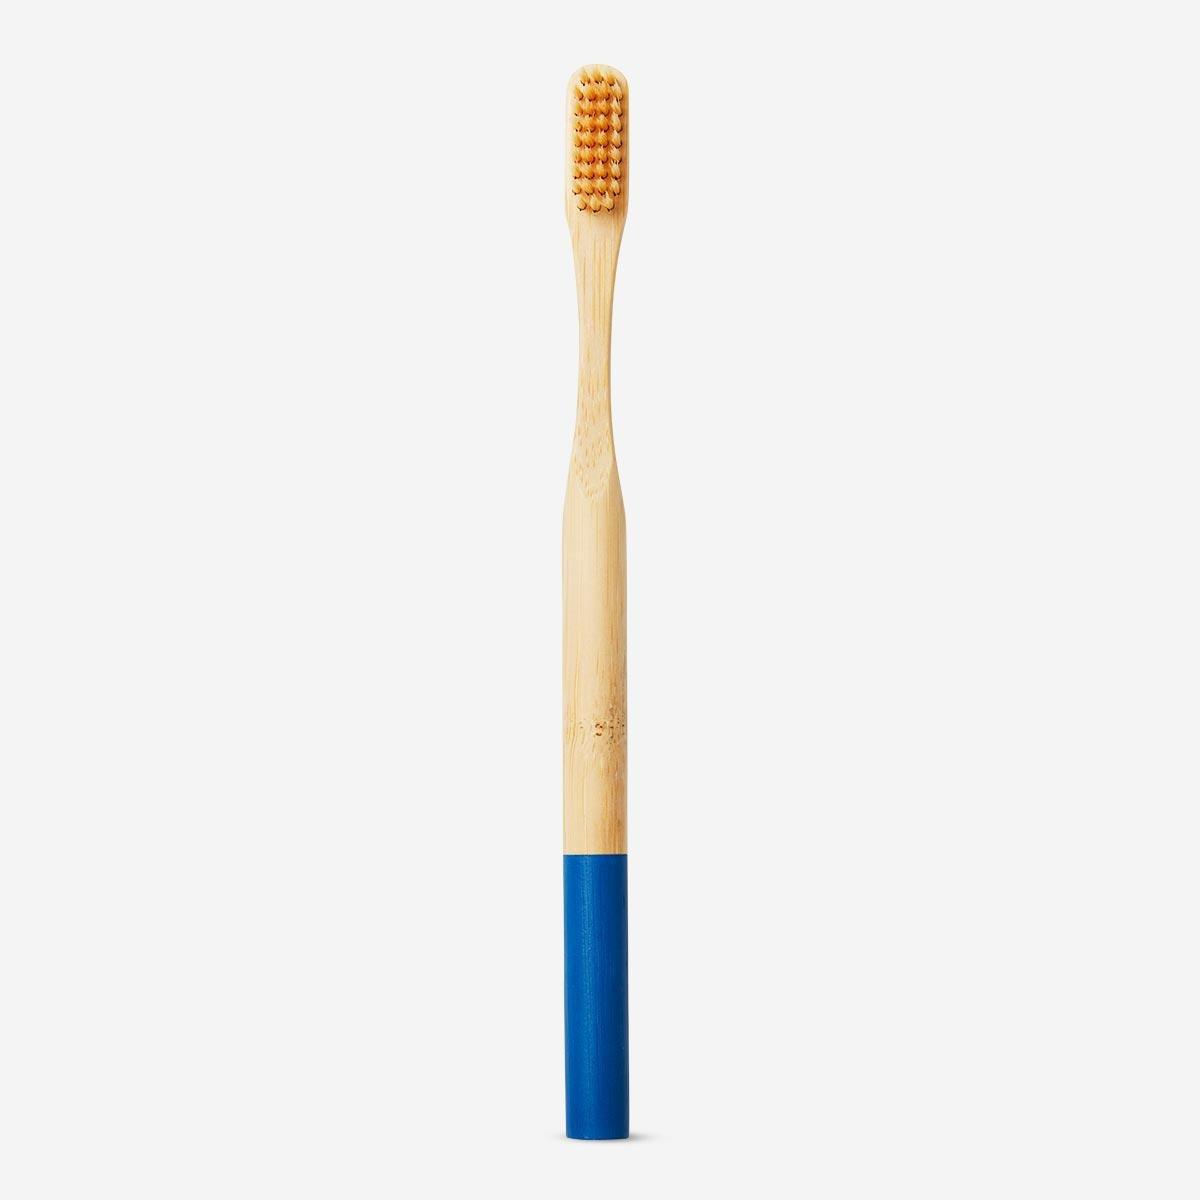 Wooden blue toothbrush